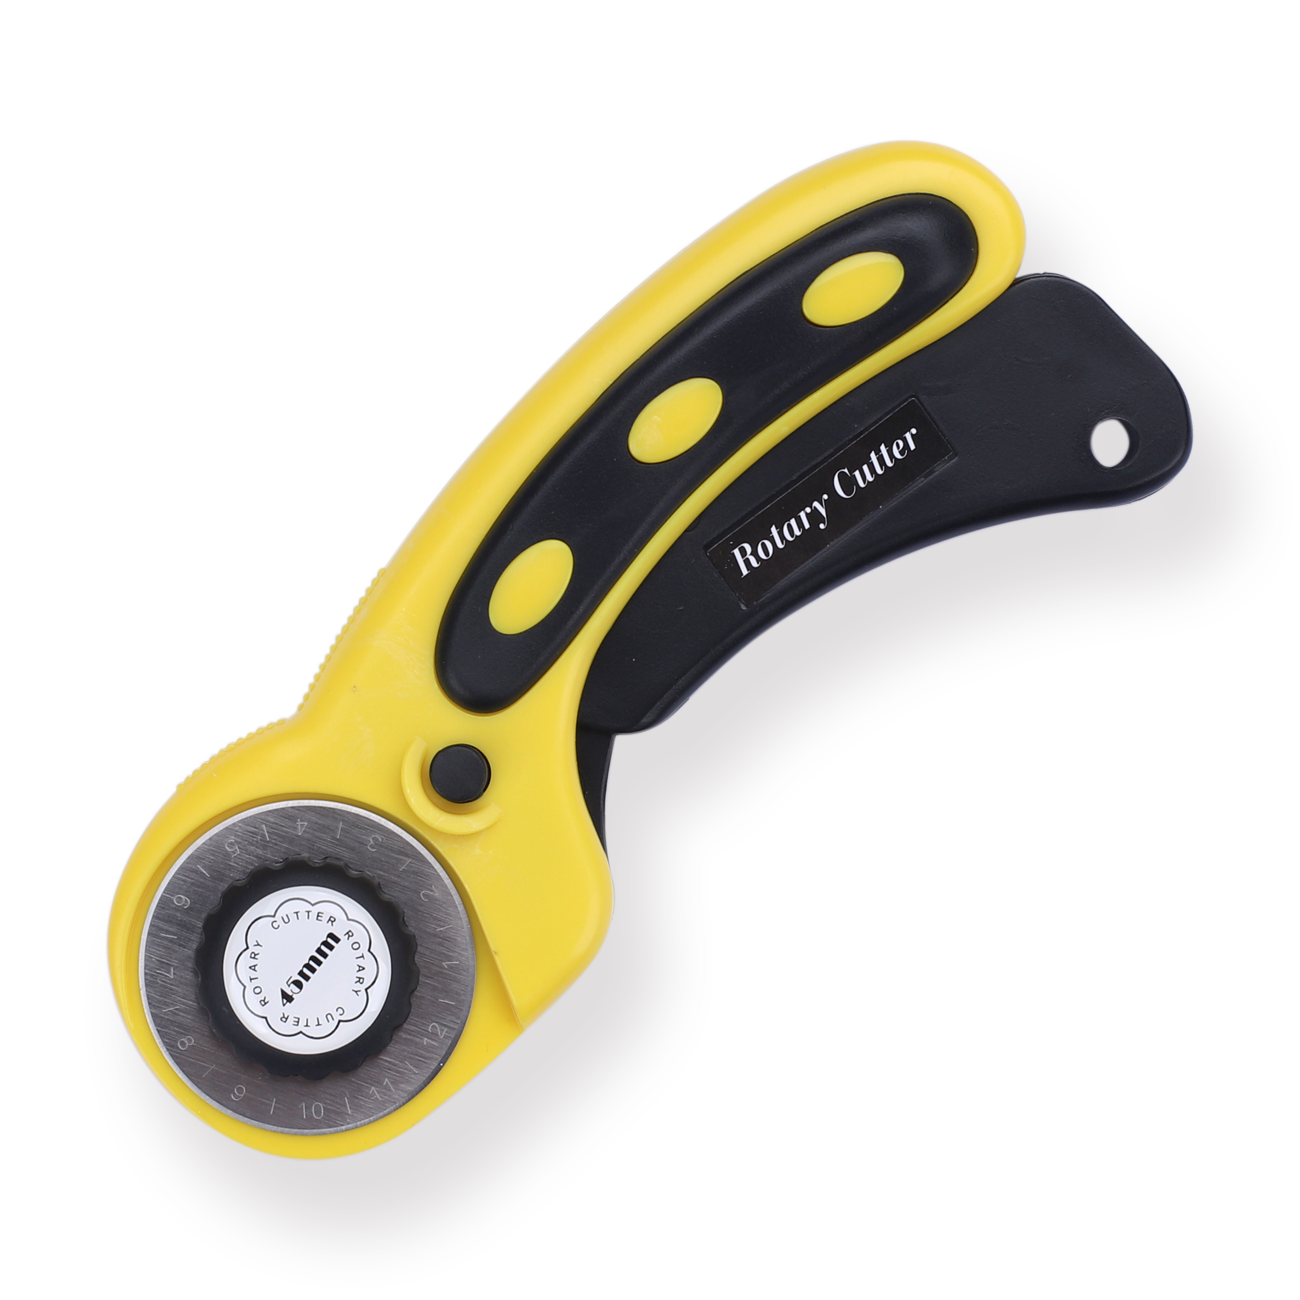 45mm Rotary Cutter for Fabric With Safety Lock Ergonomic Classic